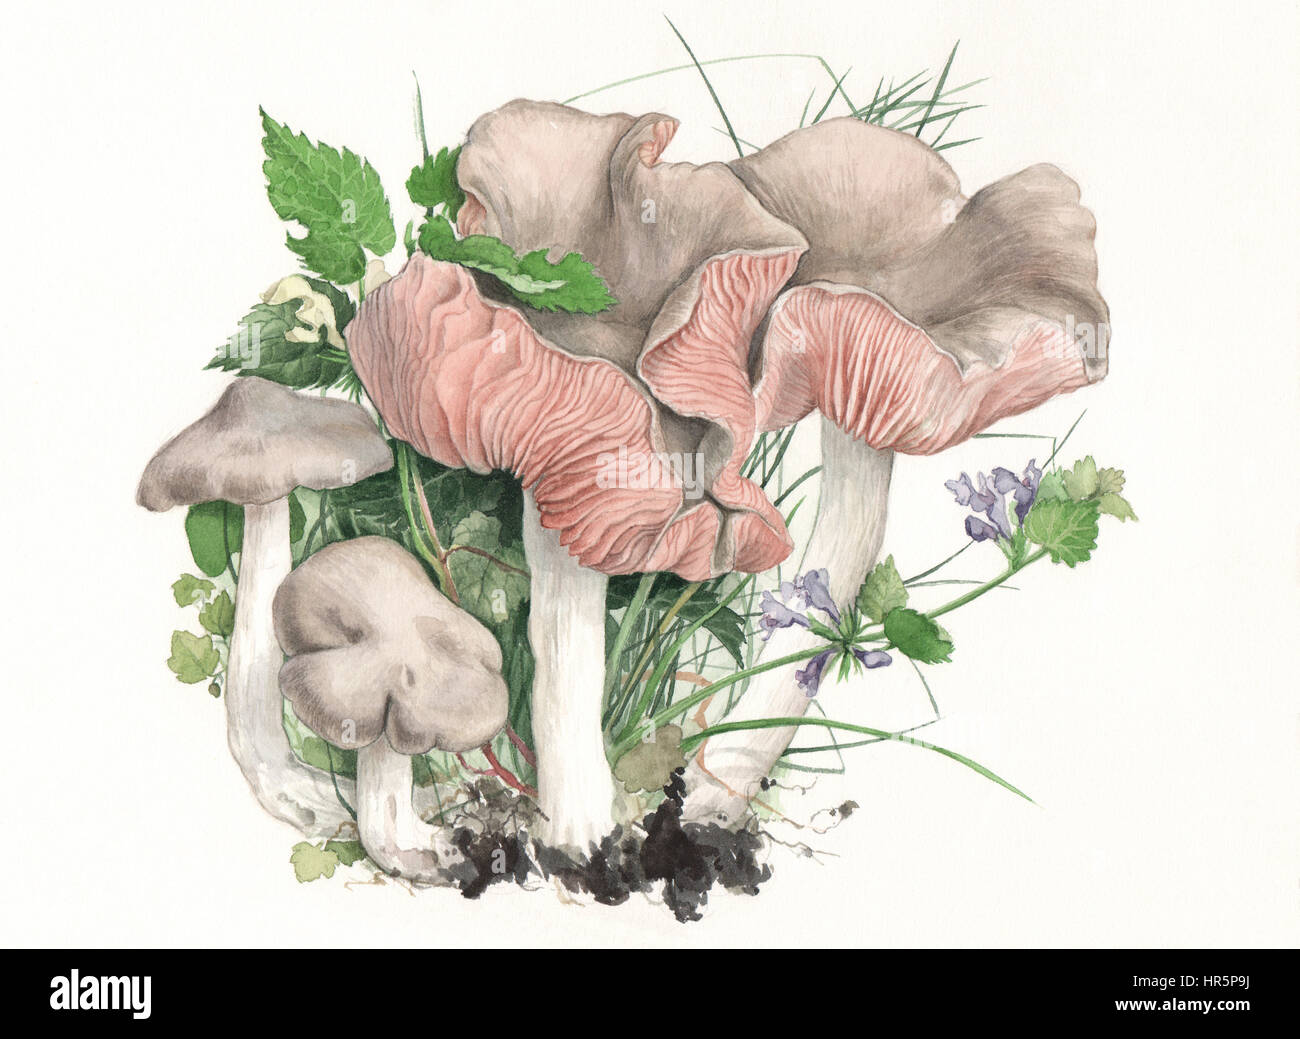 Mushrooms Entoloma clypeatum. Hand painted watercolor illustration of wild mushrooms in natural context, against off-white background. Stock Photo